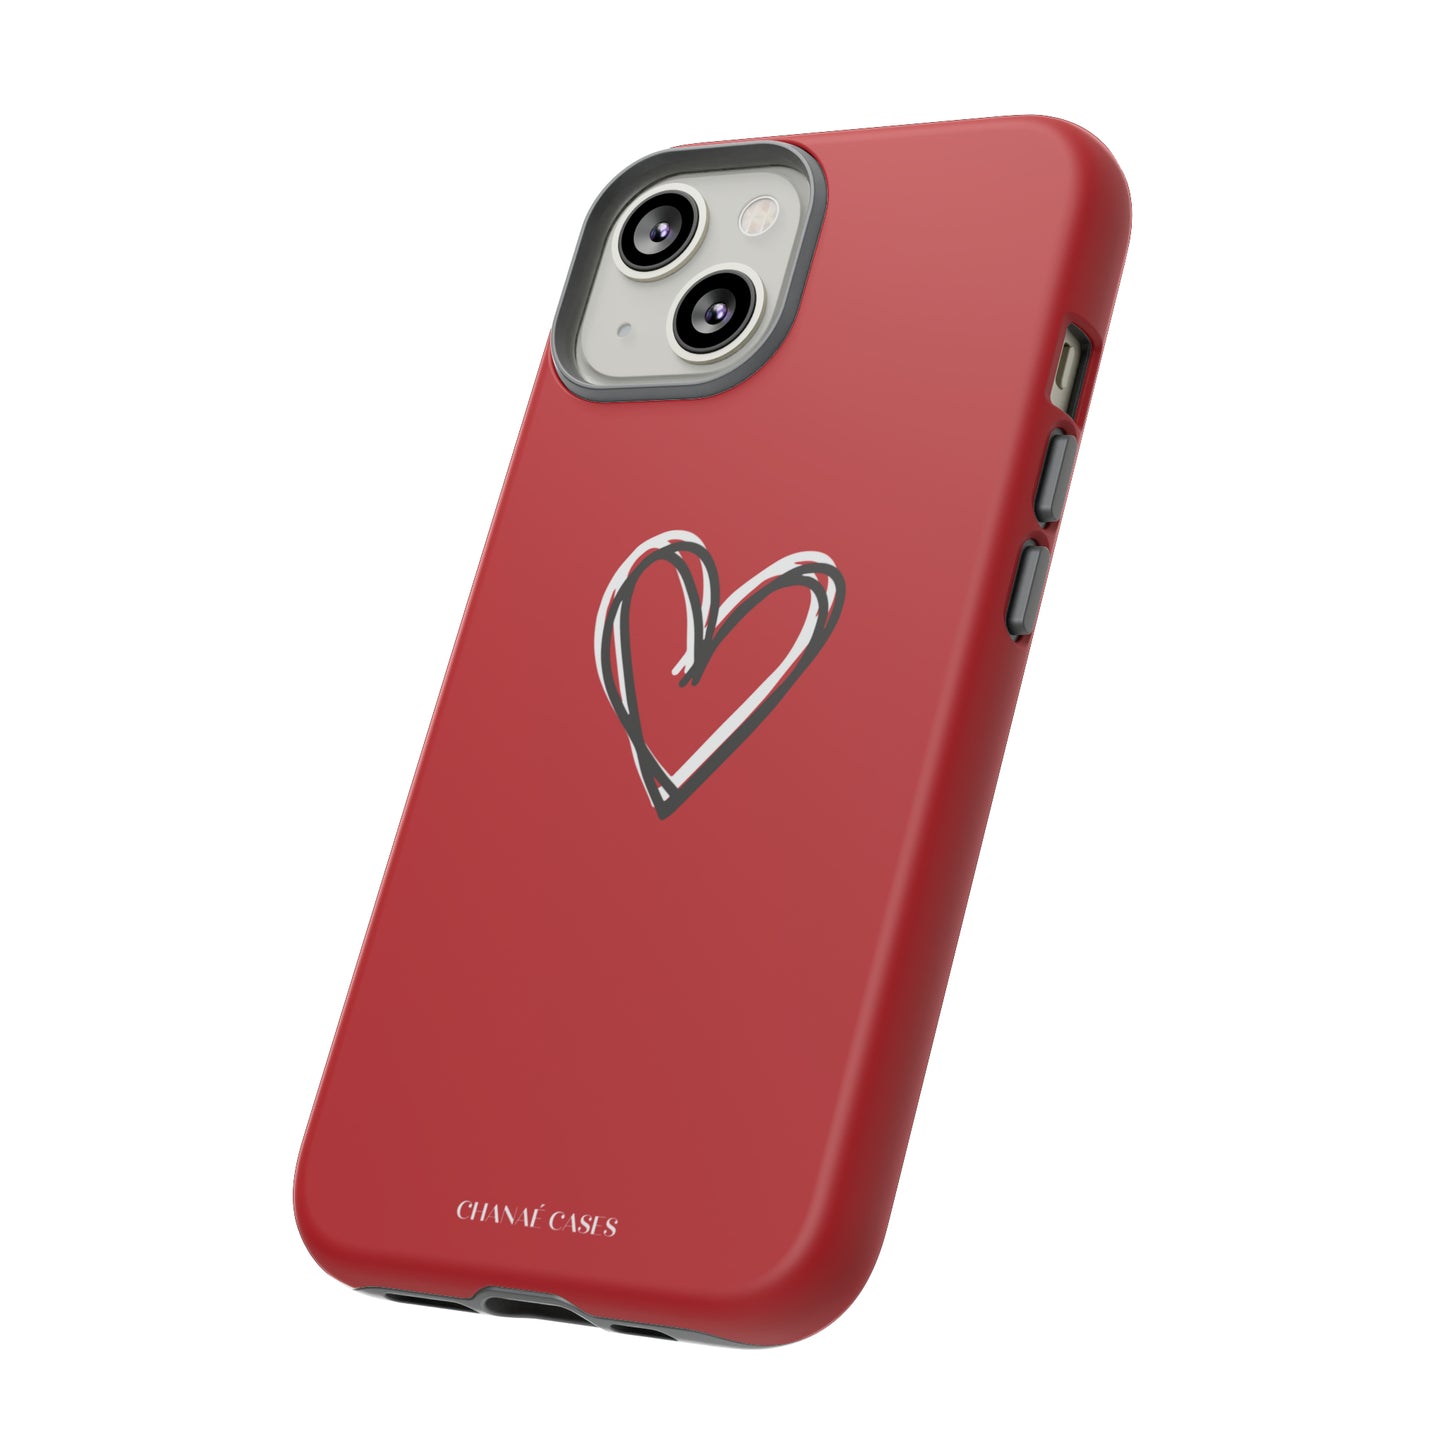 Je T'aime iPhone "Tough" Case (Red)